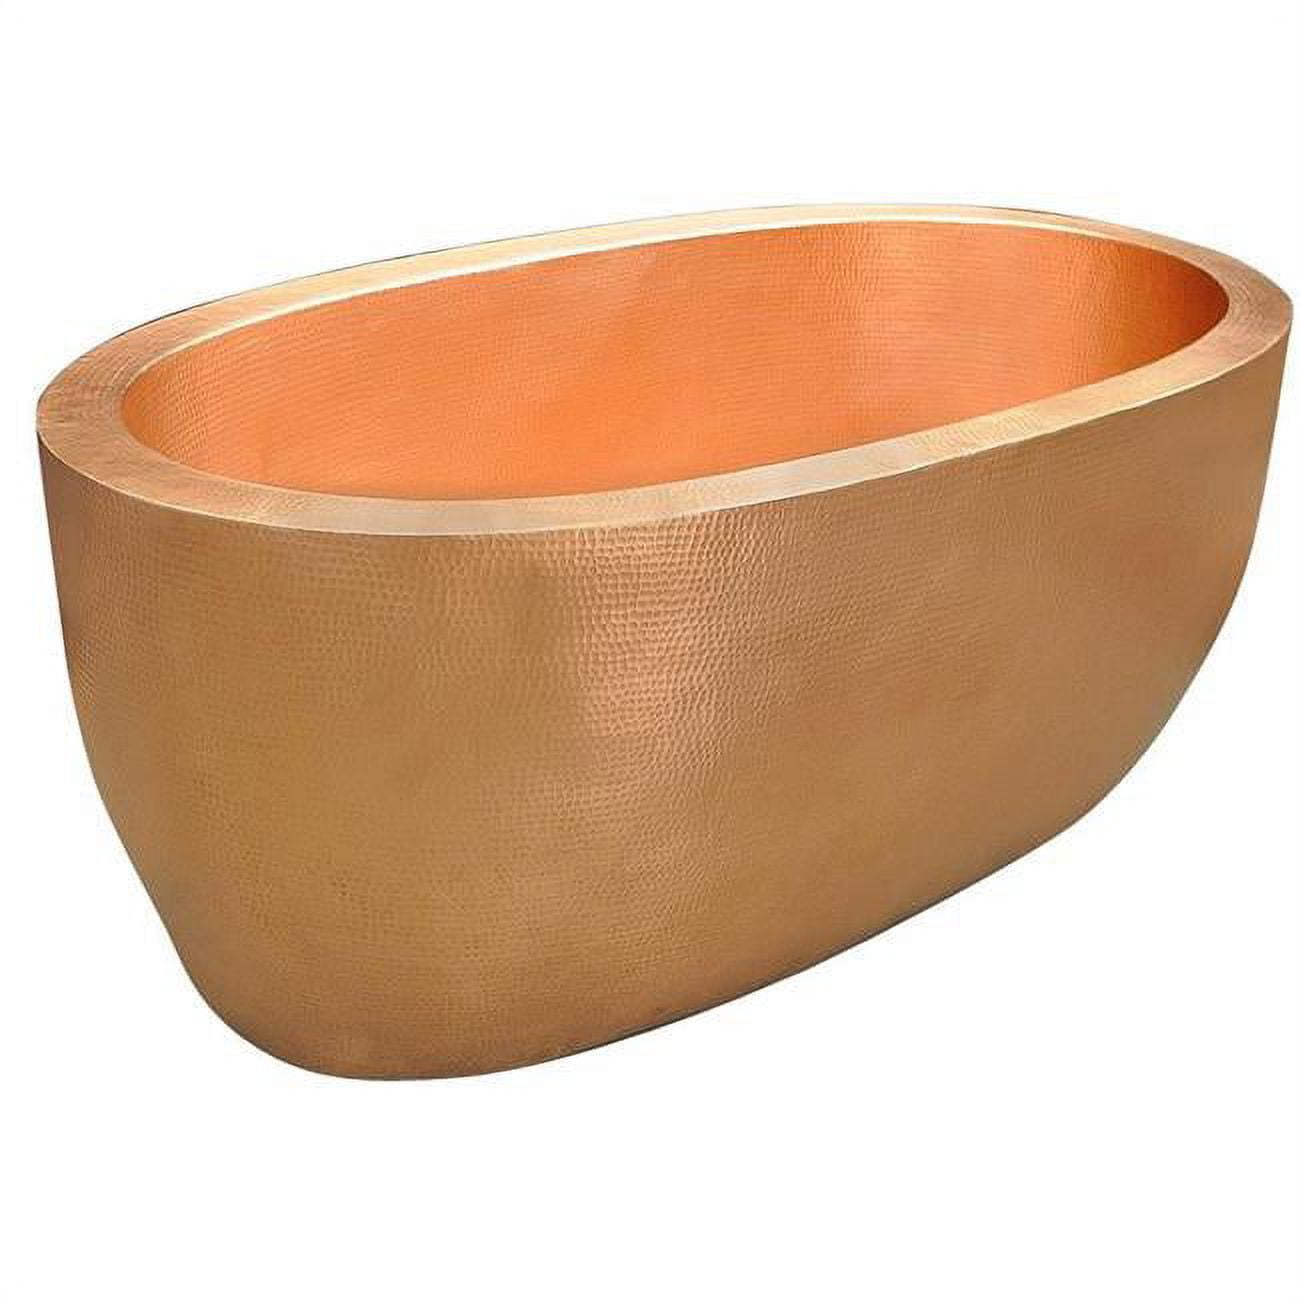 Cbt-dw-72-ma Copper Bath Tub Double Wall, Matte - Large - 32 X 32 X 72 In.